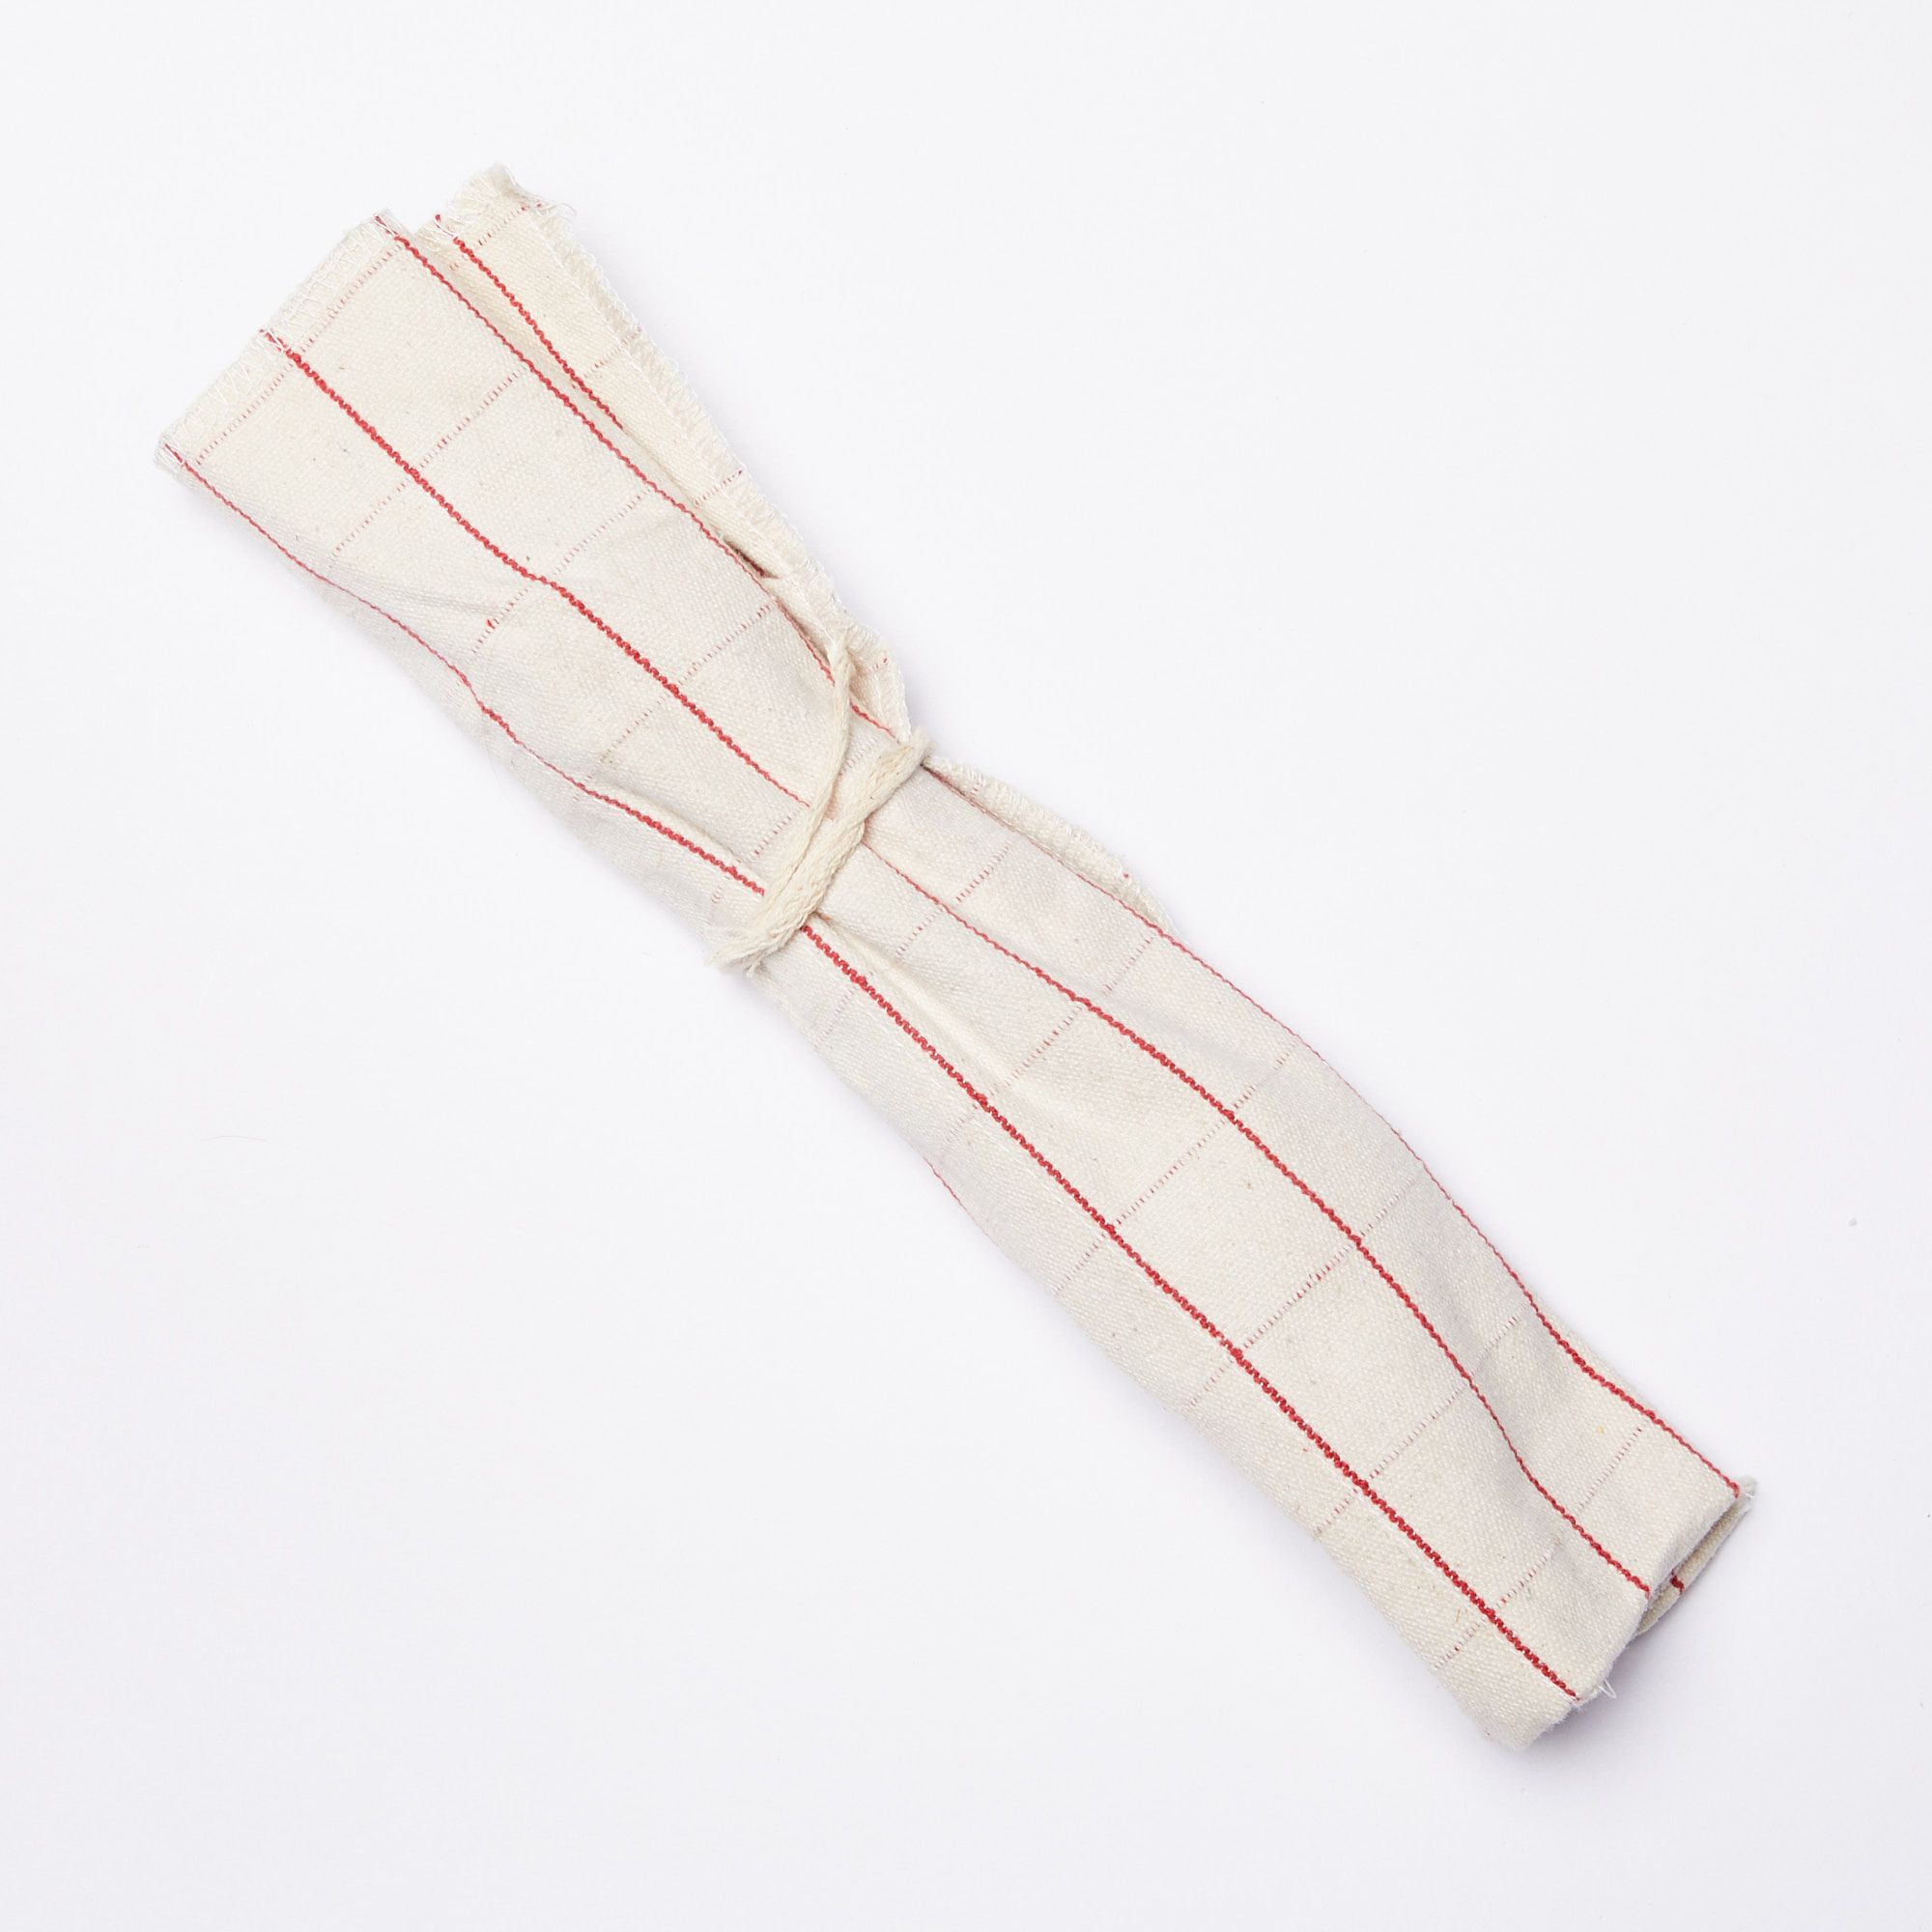 Utensil roll, made of cream color fabric with a thin red grid pattern, tied with a string